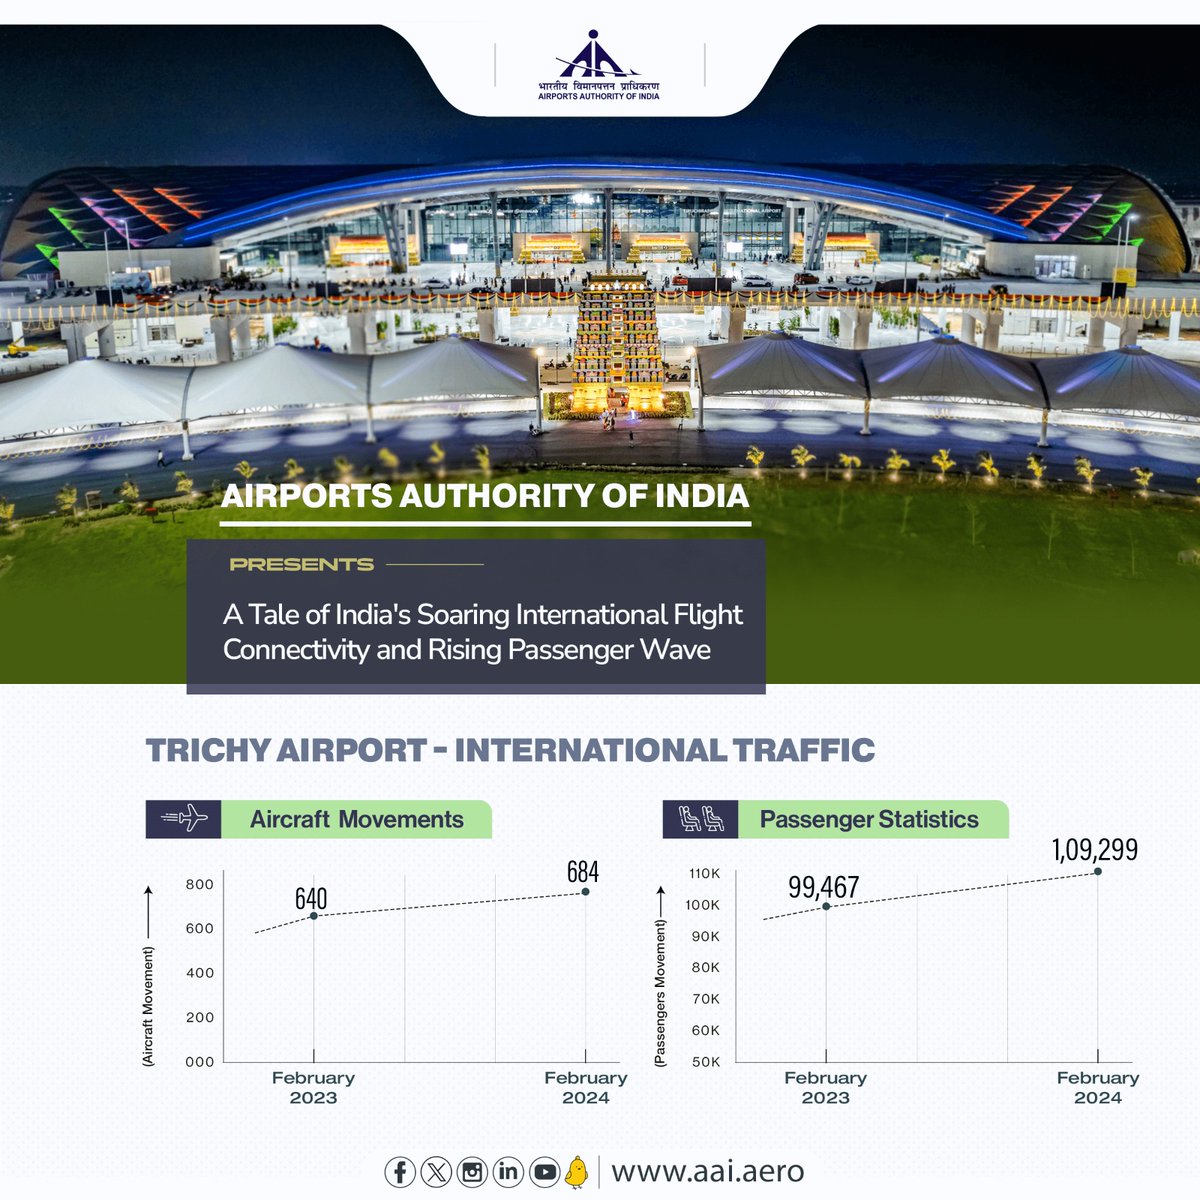 #AAI's #Trichy @aaiTRZairport is continually witnessing a substantial surge in international traffic, reflecting a robust growth trajectory in the state’s Civil Aviation Industry. The airport handled 640 International Aircraft Movements in Feb’23 which hiked to 684 International…